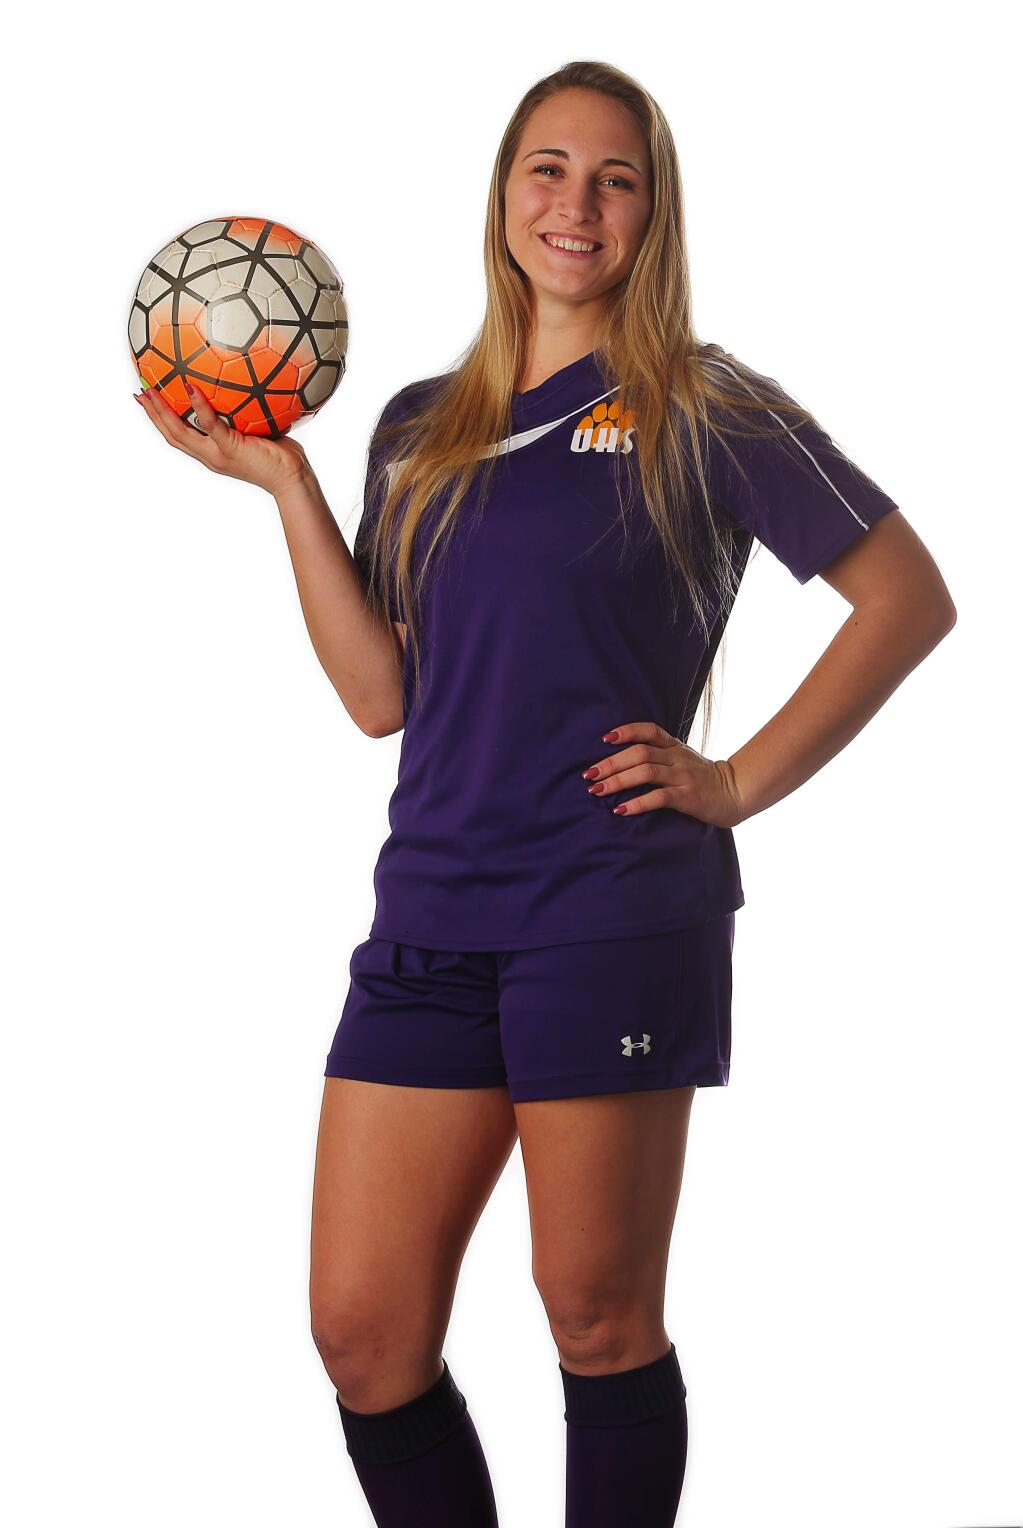 Ukiah's Taylor Bray is the girls large school soccer player of the year.(Christopher Chung/ The Press Democrat)